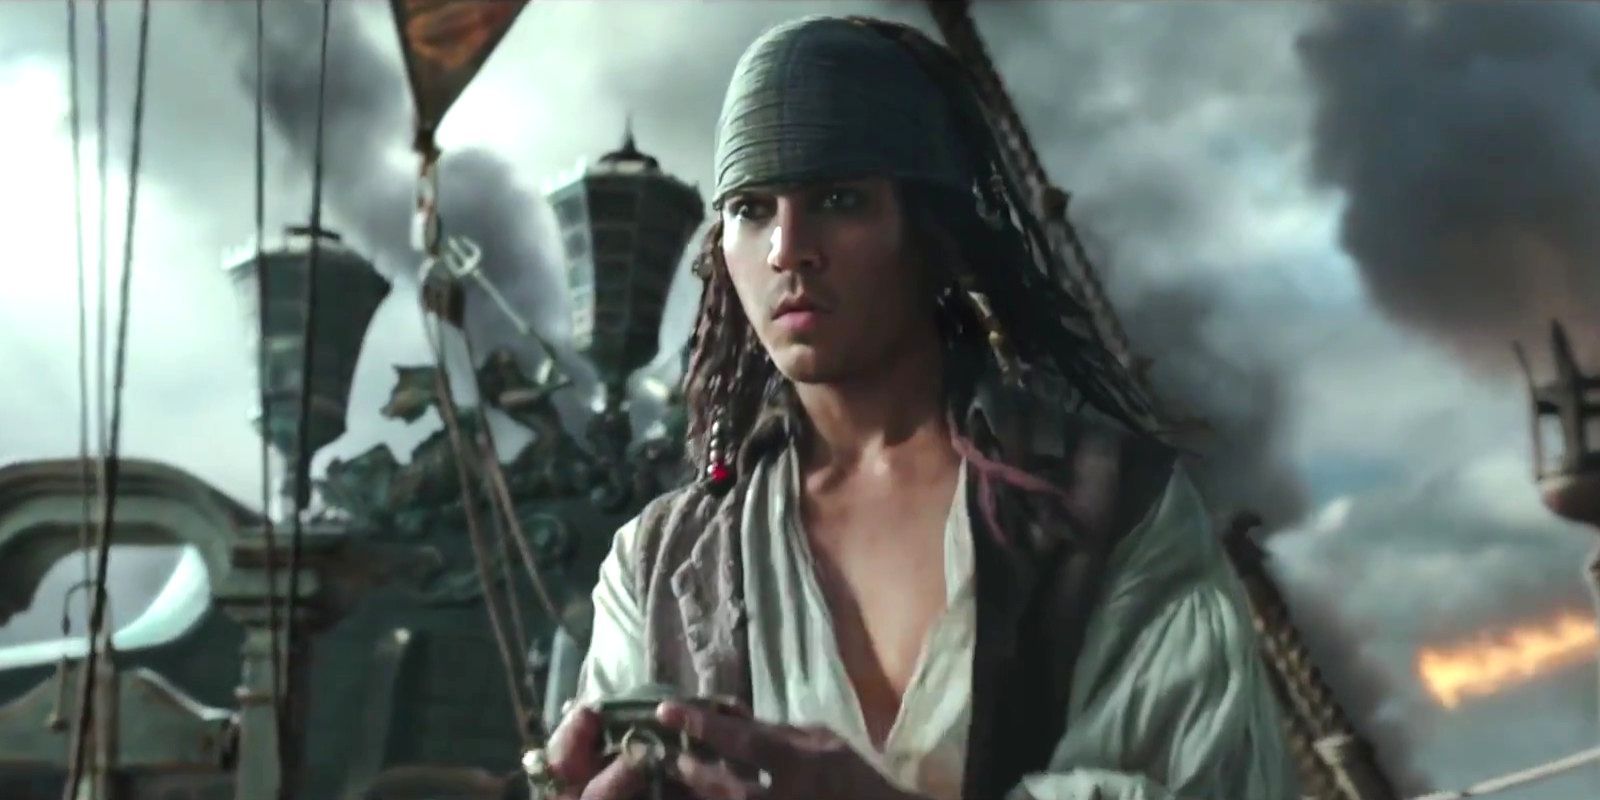 Young Jack Sparrow in Pirates of the Caribbean 5